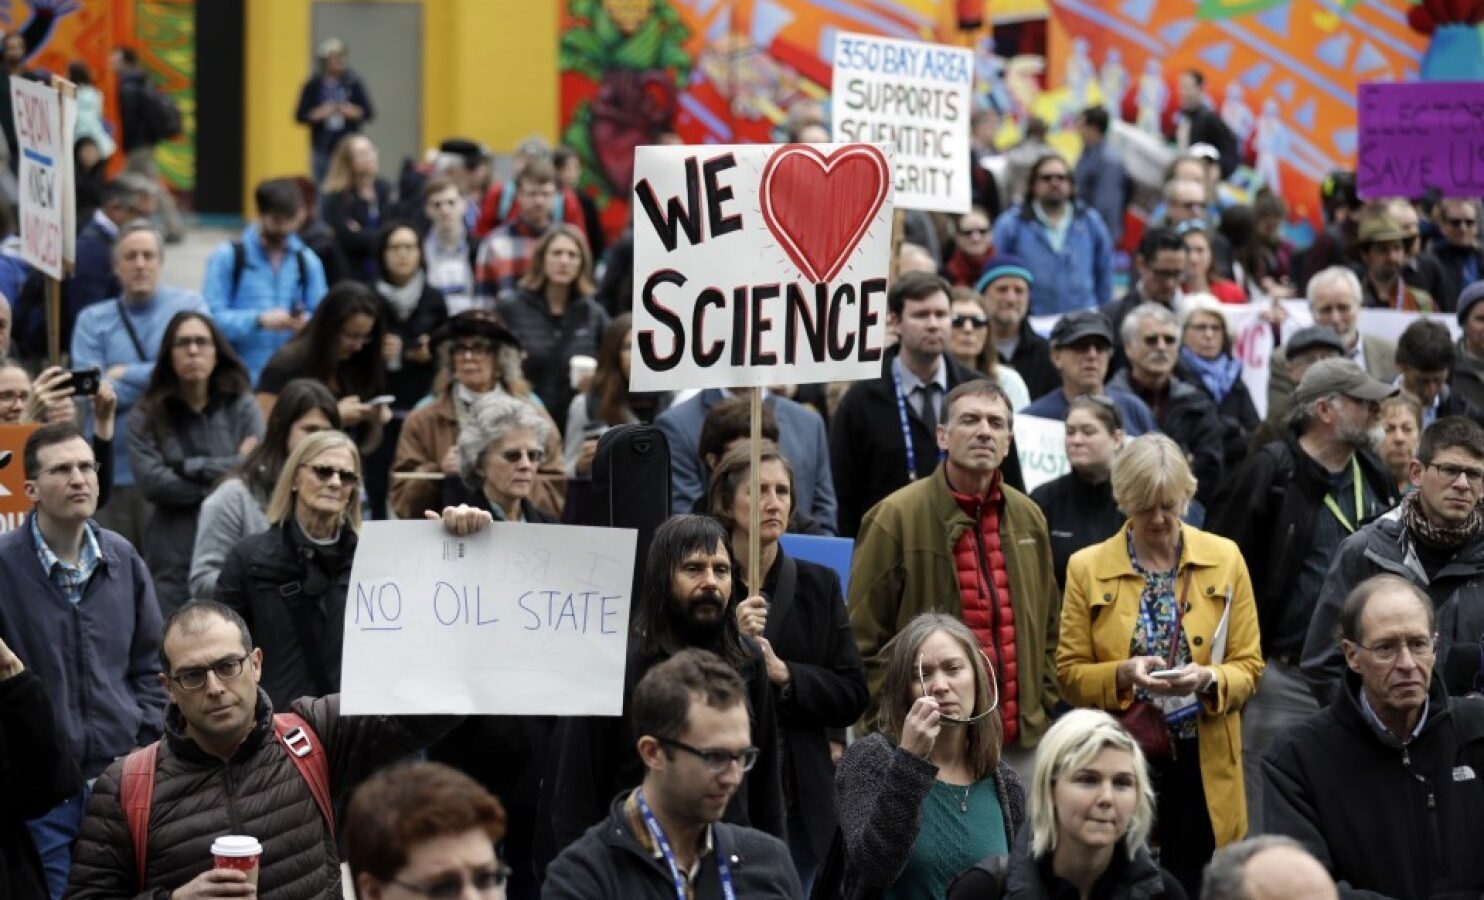 People hold signs as they listen to a group of scientists speak during a rally in conjunction with the American Geophysical Union's fall meeting in San Francisco. (AP Photo/Marcio Jose Sanchez)